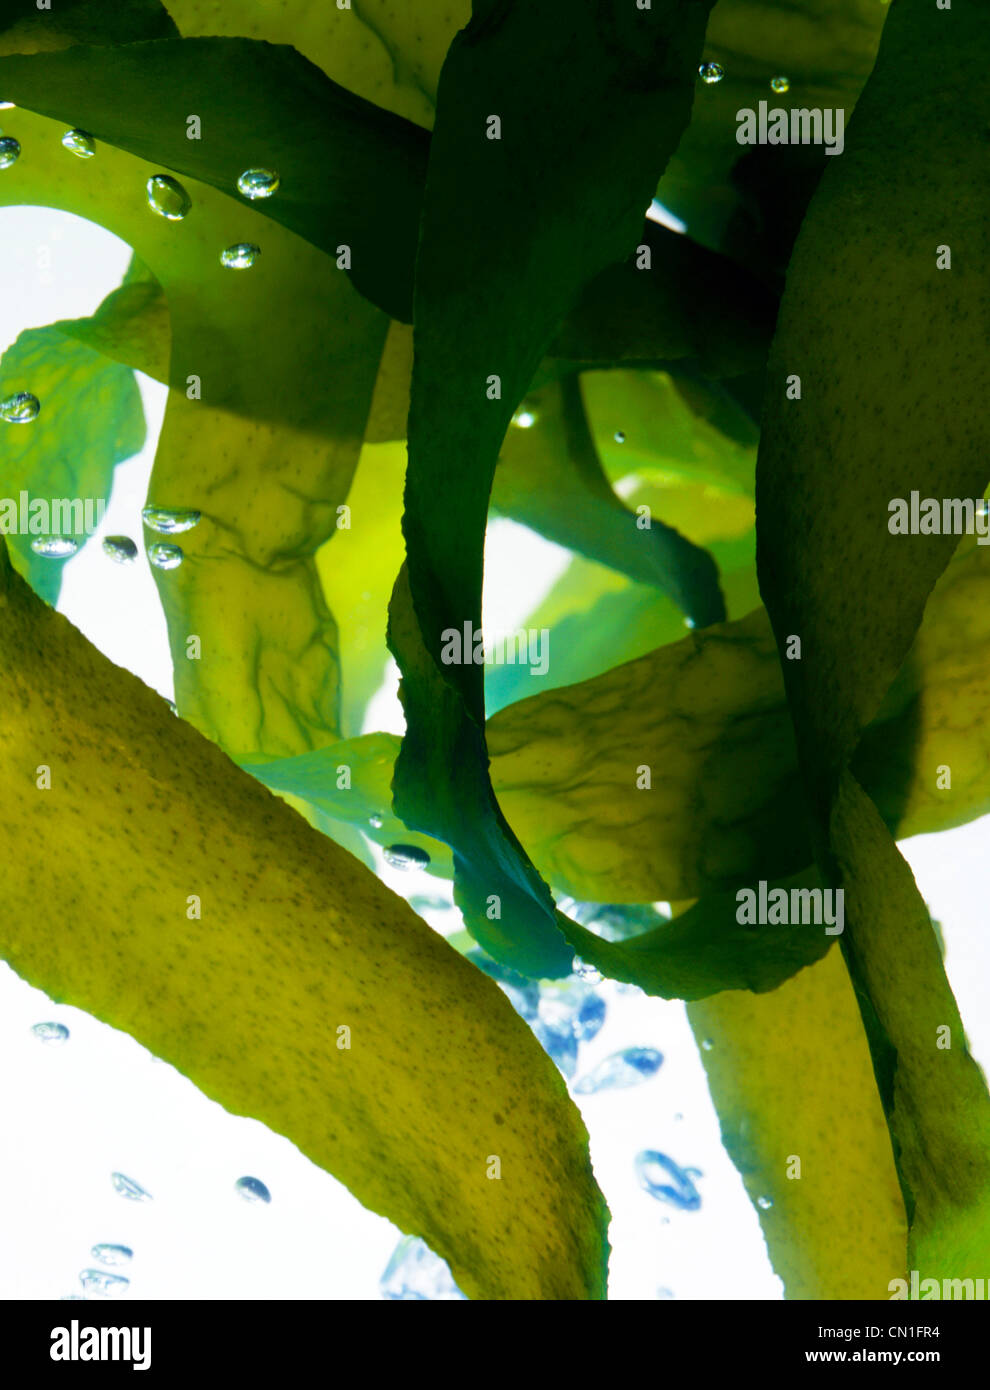 Seaweed Under Water with Bubbles Stock Photo